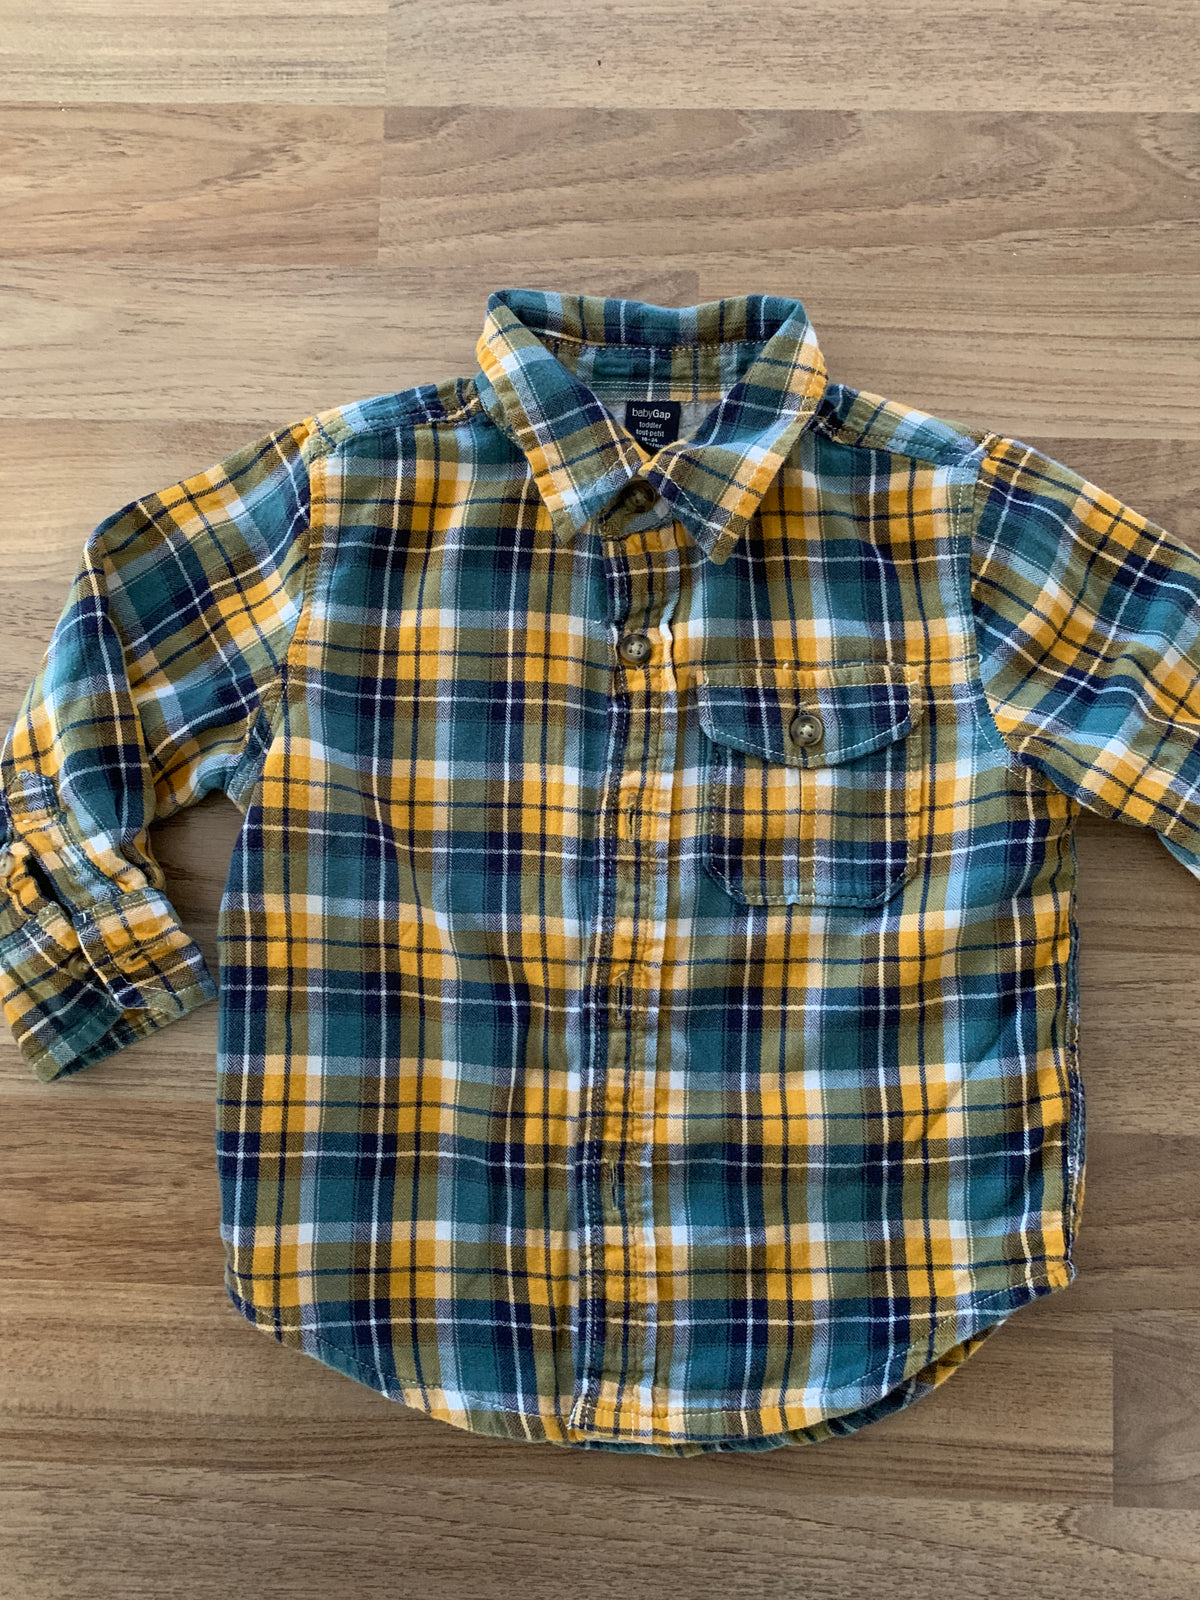 Full Button Up Lined Shirt (Boys Size 18-24M)